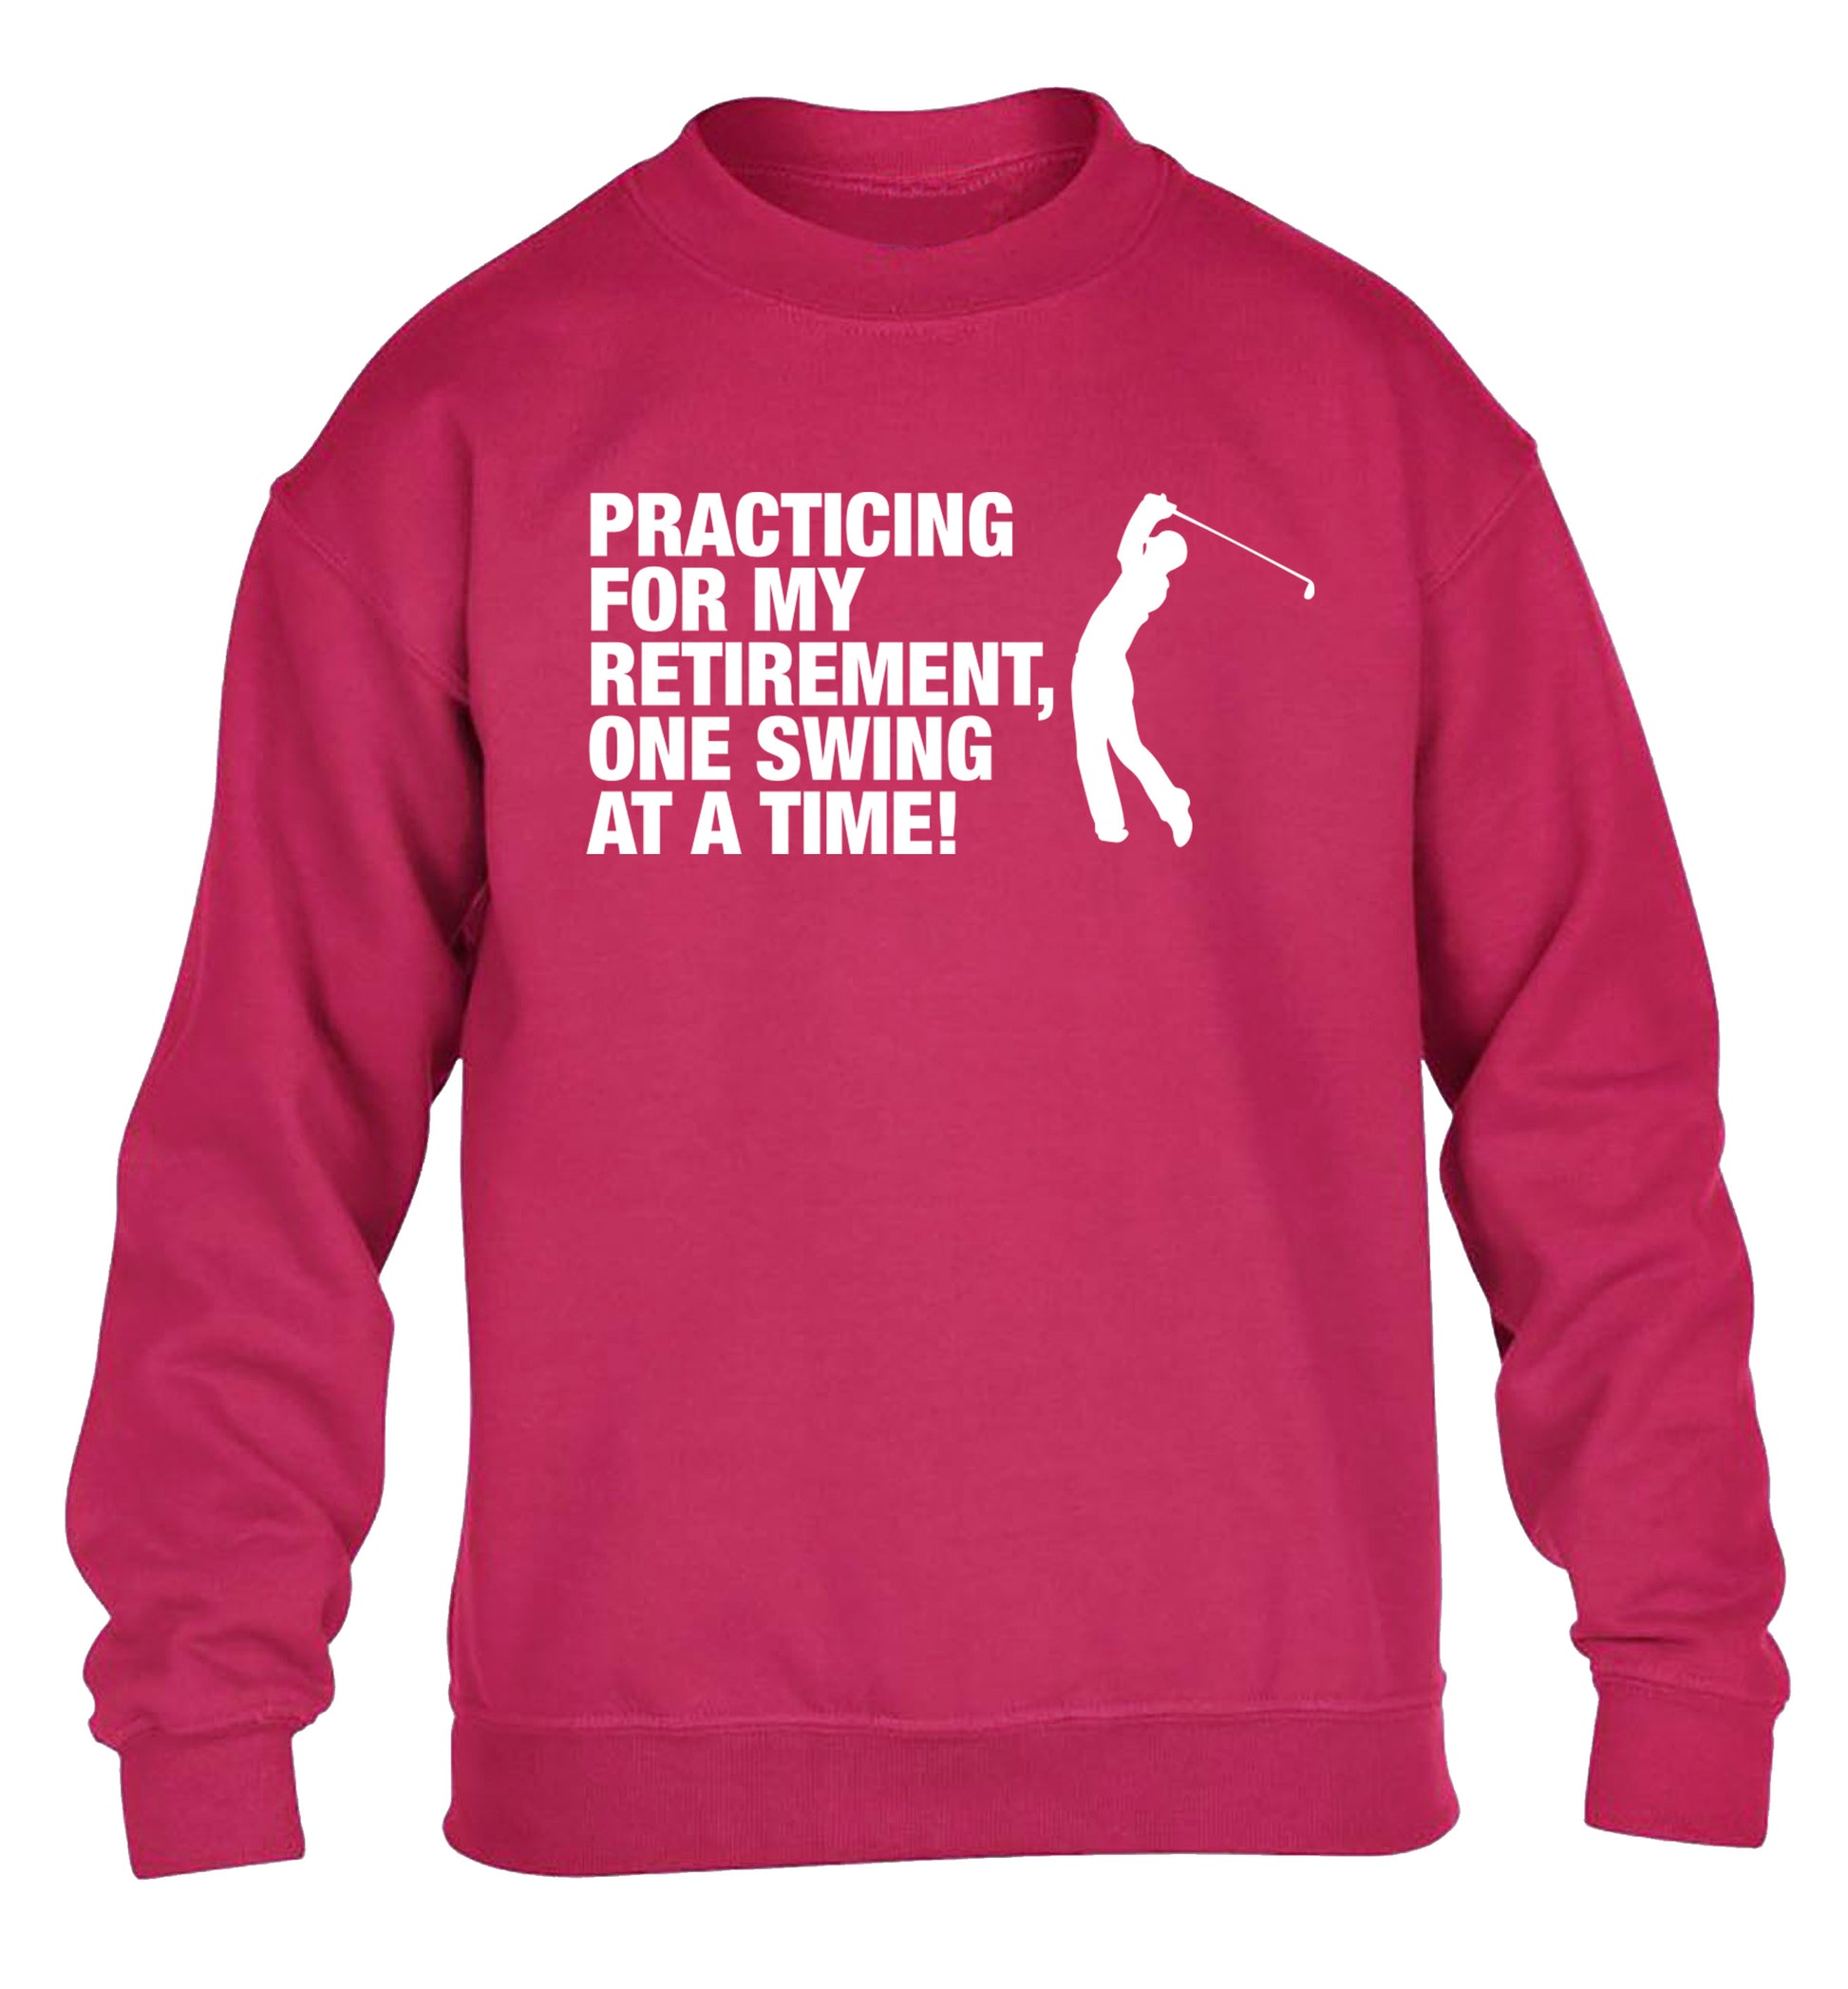 Practicing for my retirement one swing at a time children's pink sweater 12-13 Years